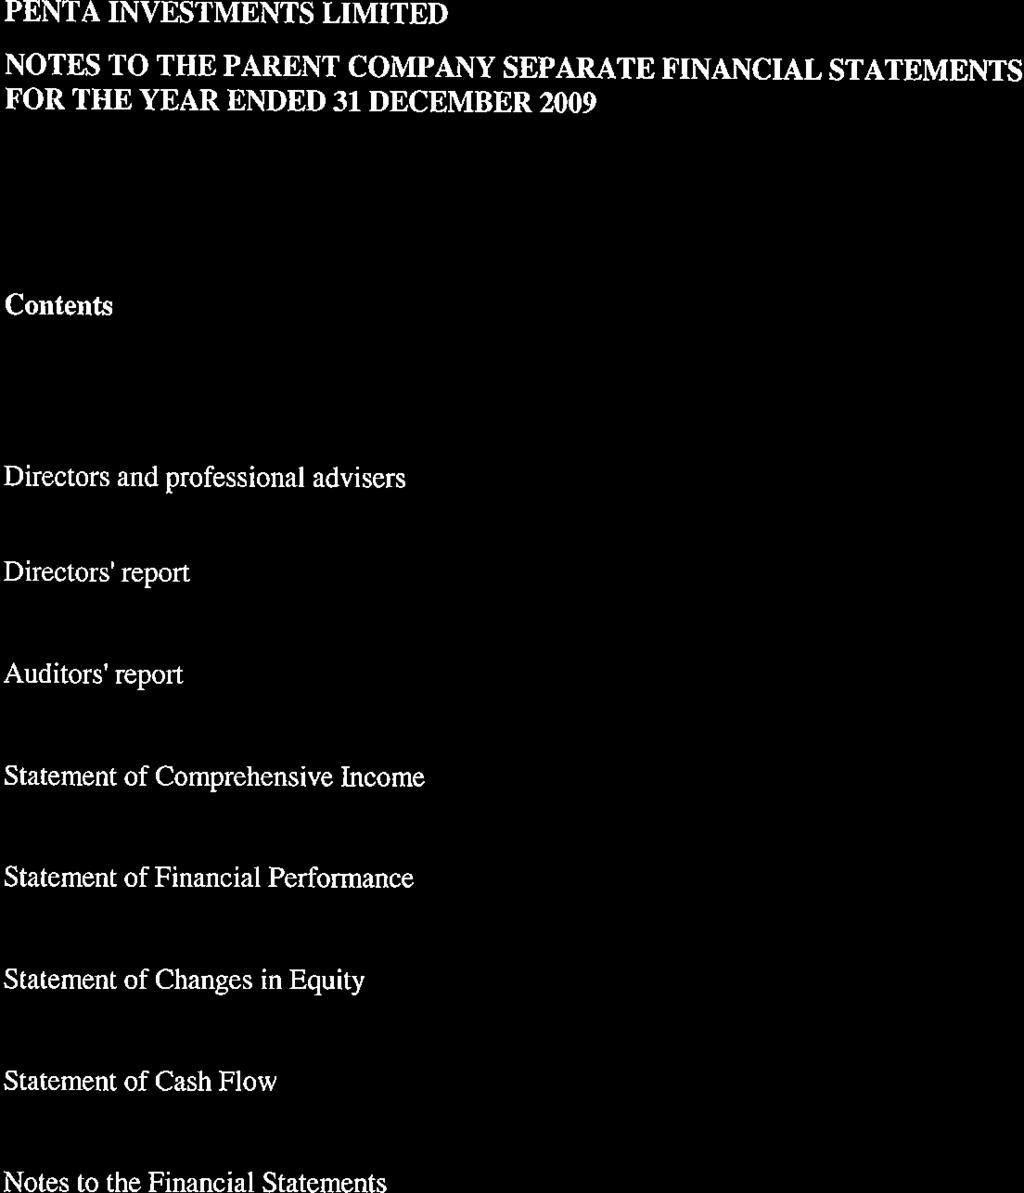 PENTA INVESTMENTS LIMITED NOTF"S TO THE PARENT COMPAI\Y SEPARATE FINANCIAL STATEMENTS FOR THE YEAR ENDED 31 DECEMBER 2OO9 Contents Page Directors and professional advisers I Directors' report